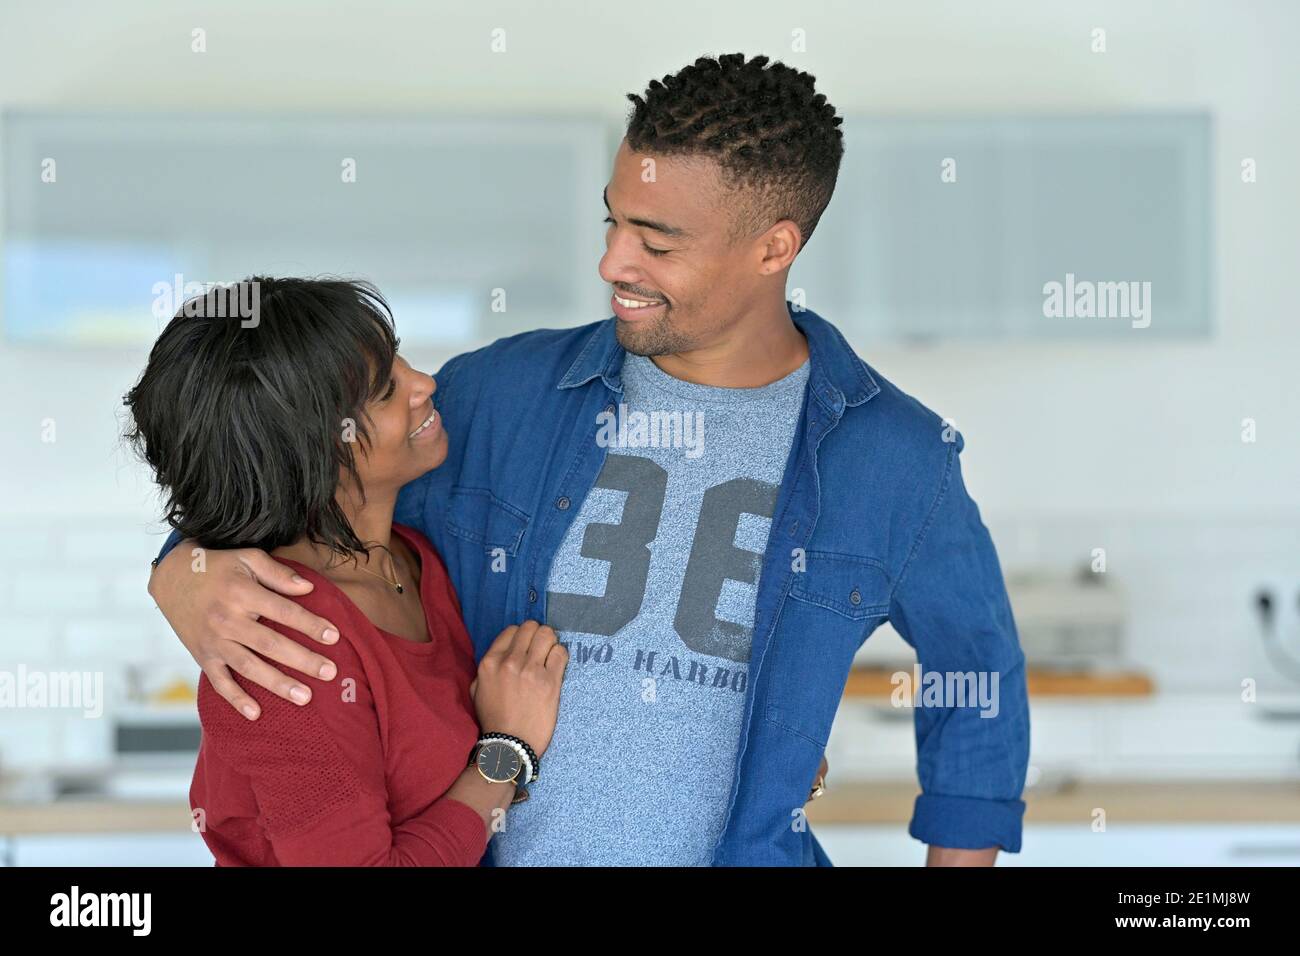 Portrait of african american couple embracing each other, lifestyle Stock Photo